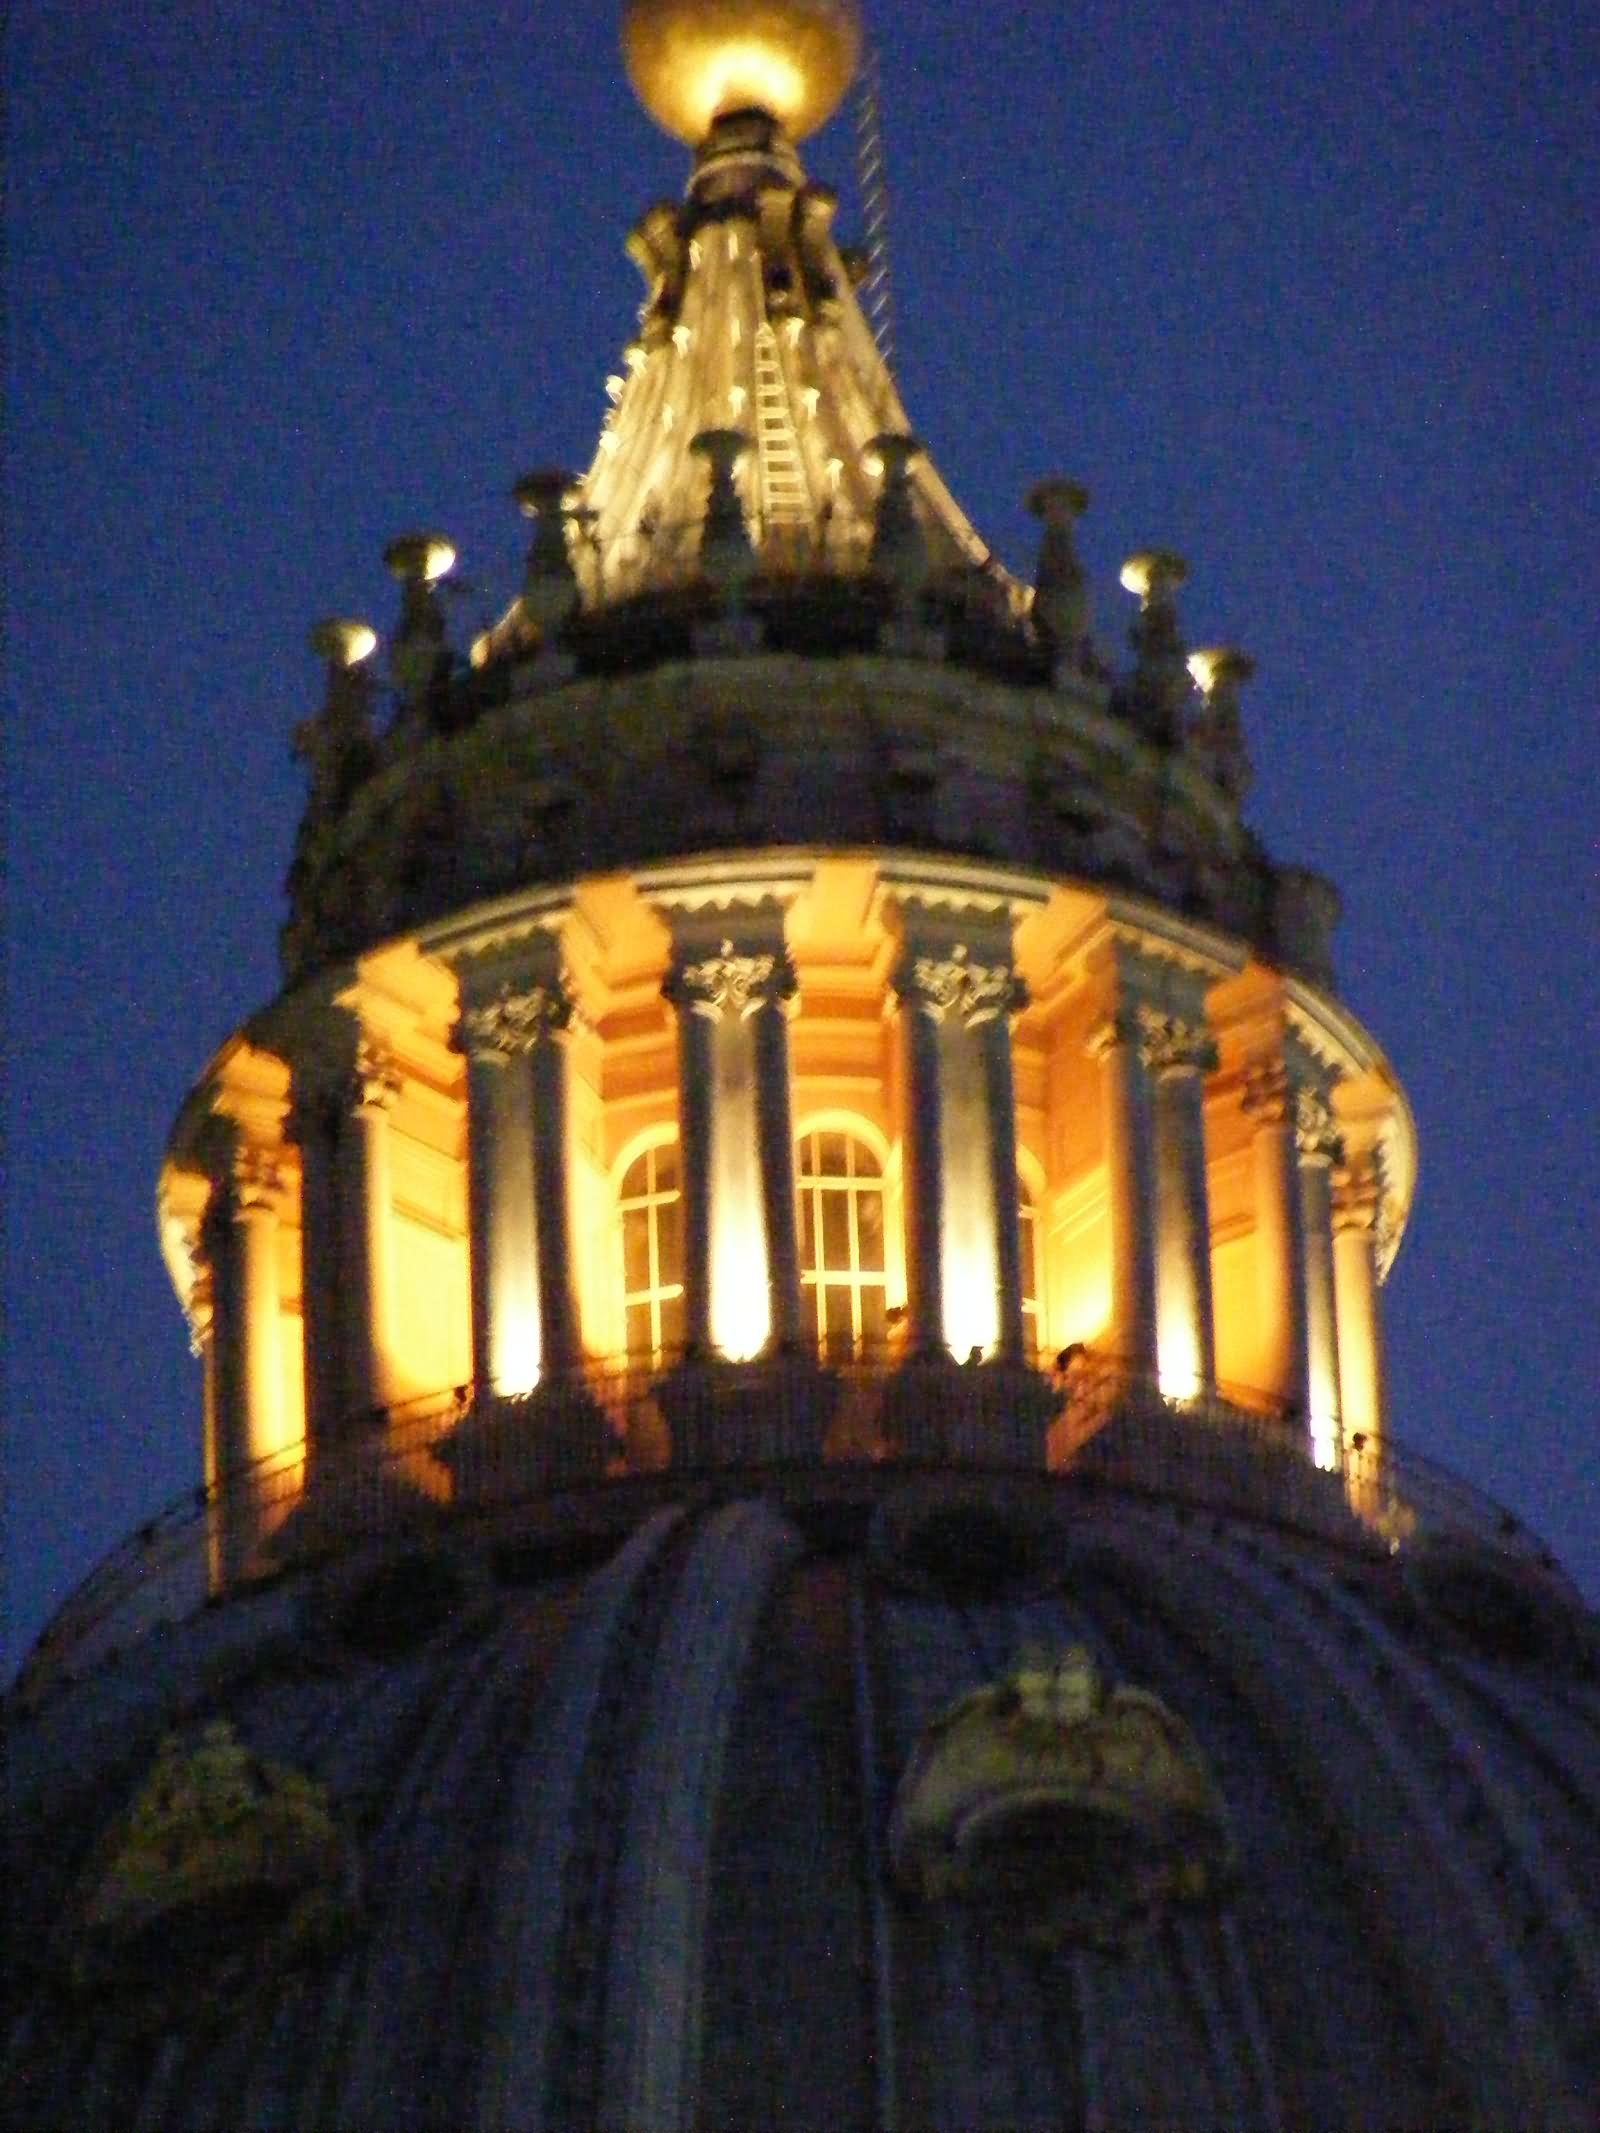 Dome Of The St. Peter's Basilica At Night